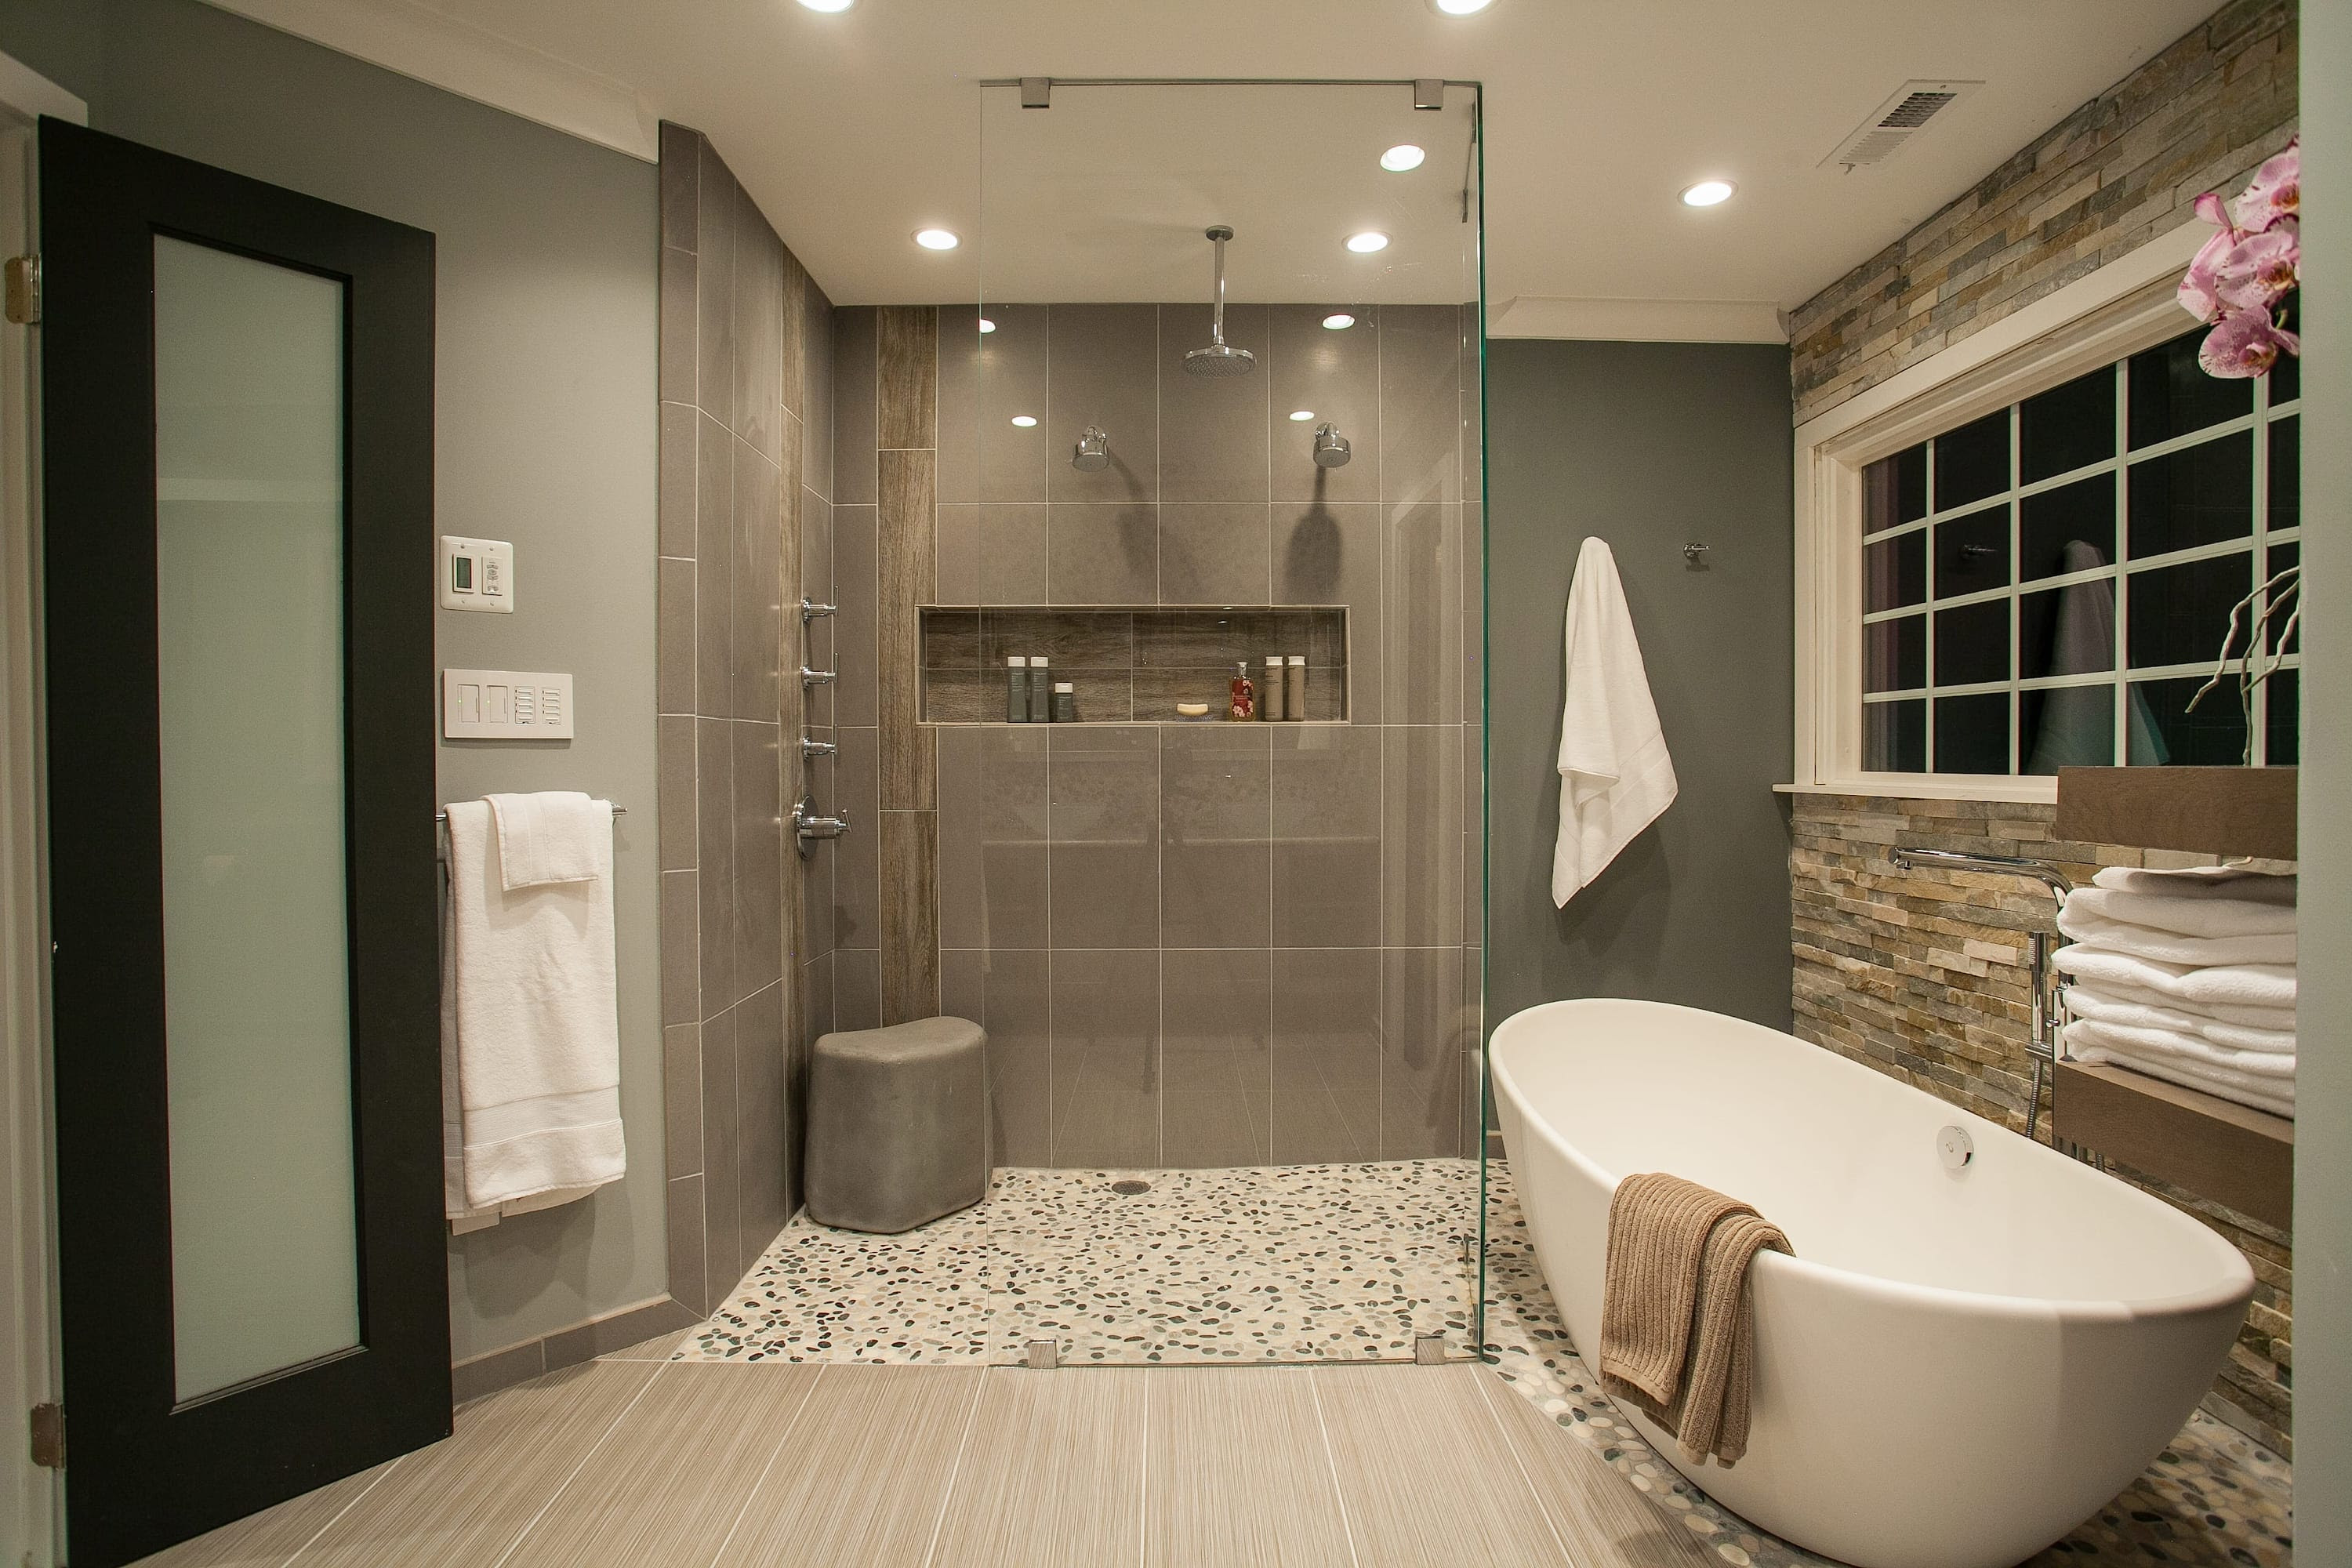 6 Design Ideas for Spa-Like Bathrooms - Best In American ...